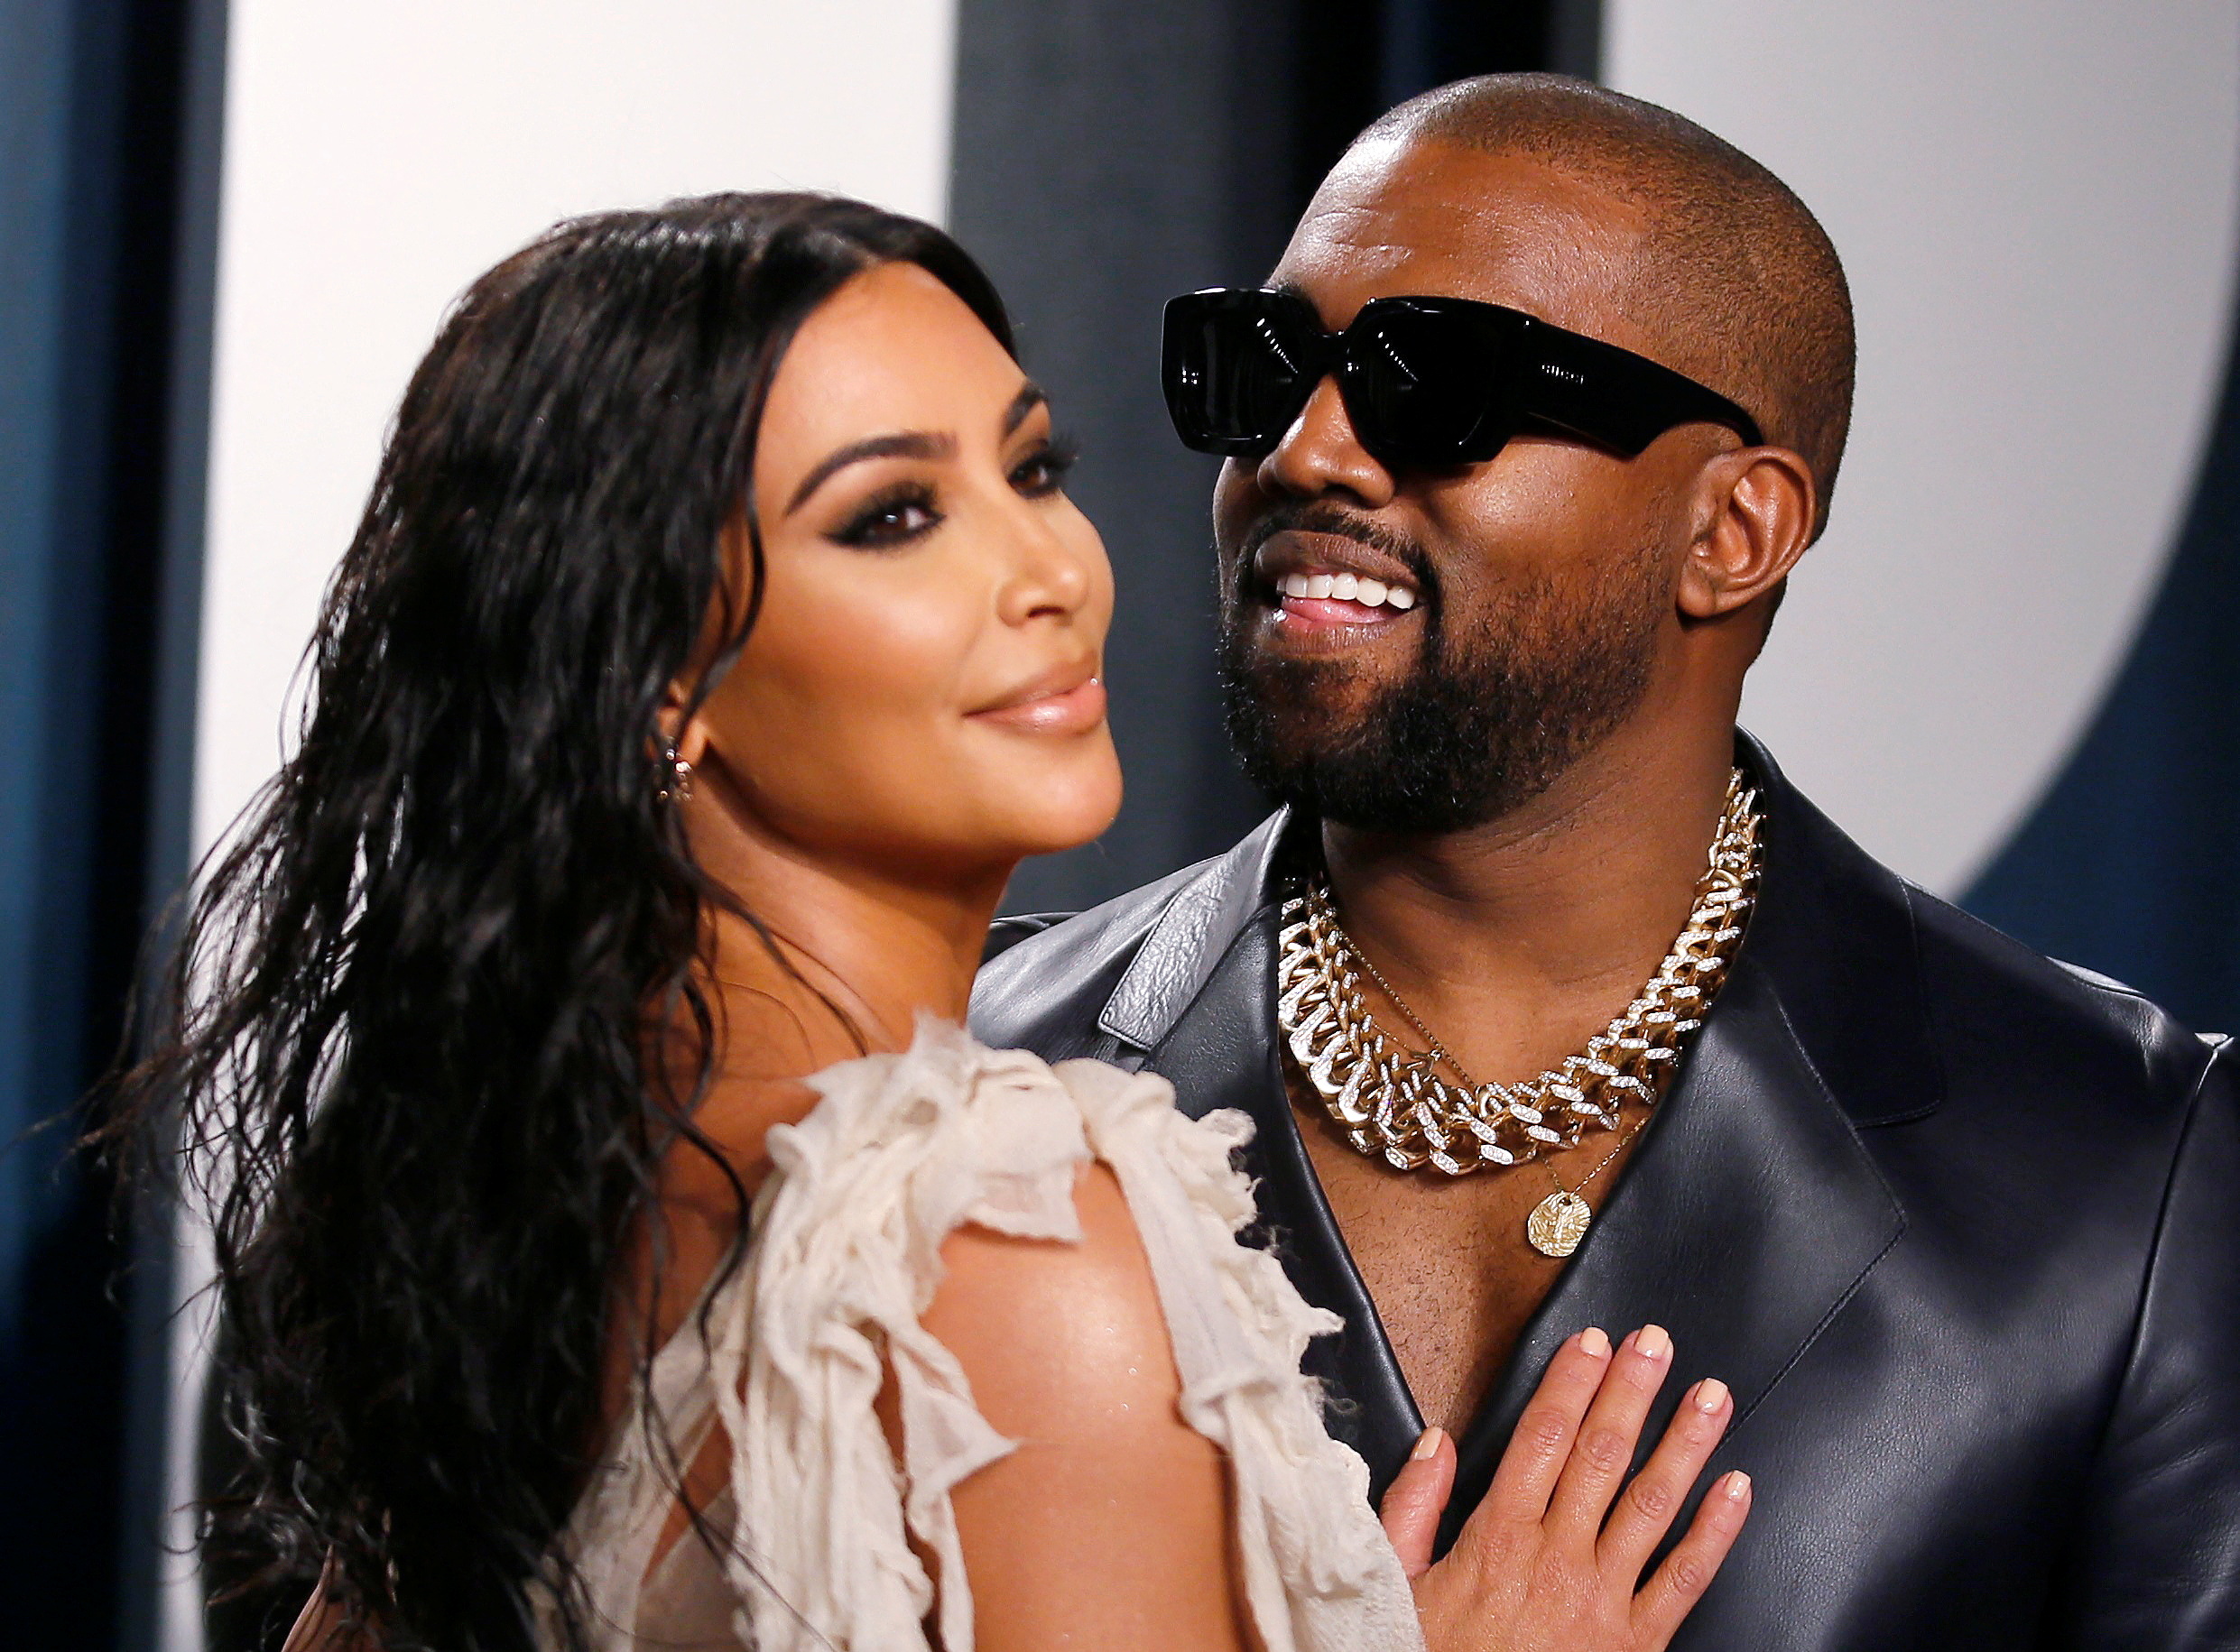 At the time, the romance between Pete and Kim made Kanye West, now the businesswoman's ex-husband, extremely jealous (Photo: REUTERS/Danny Moloshok/File Photo)